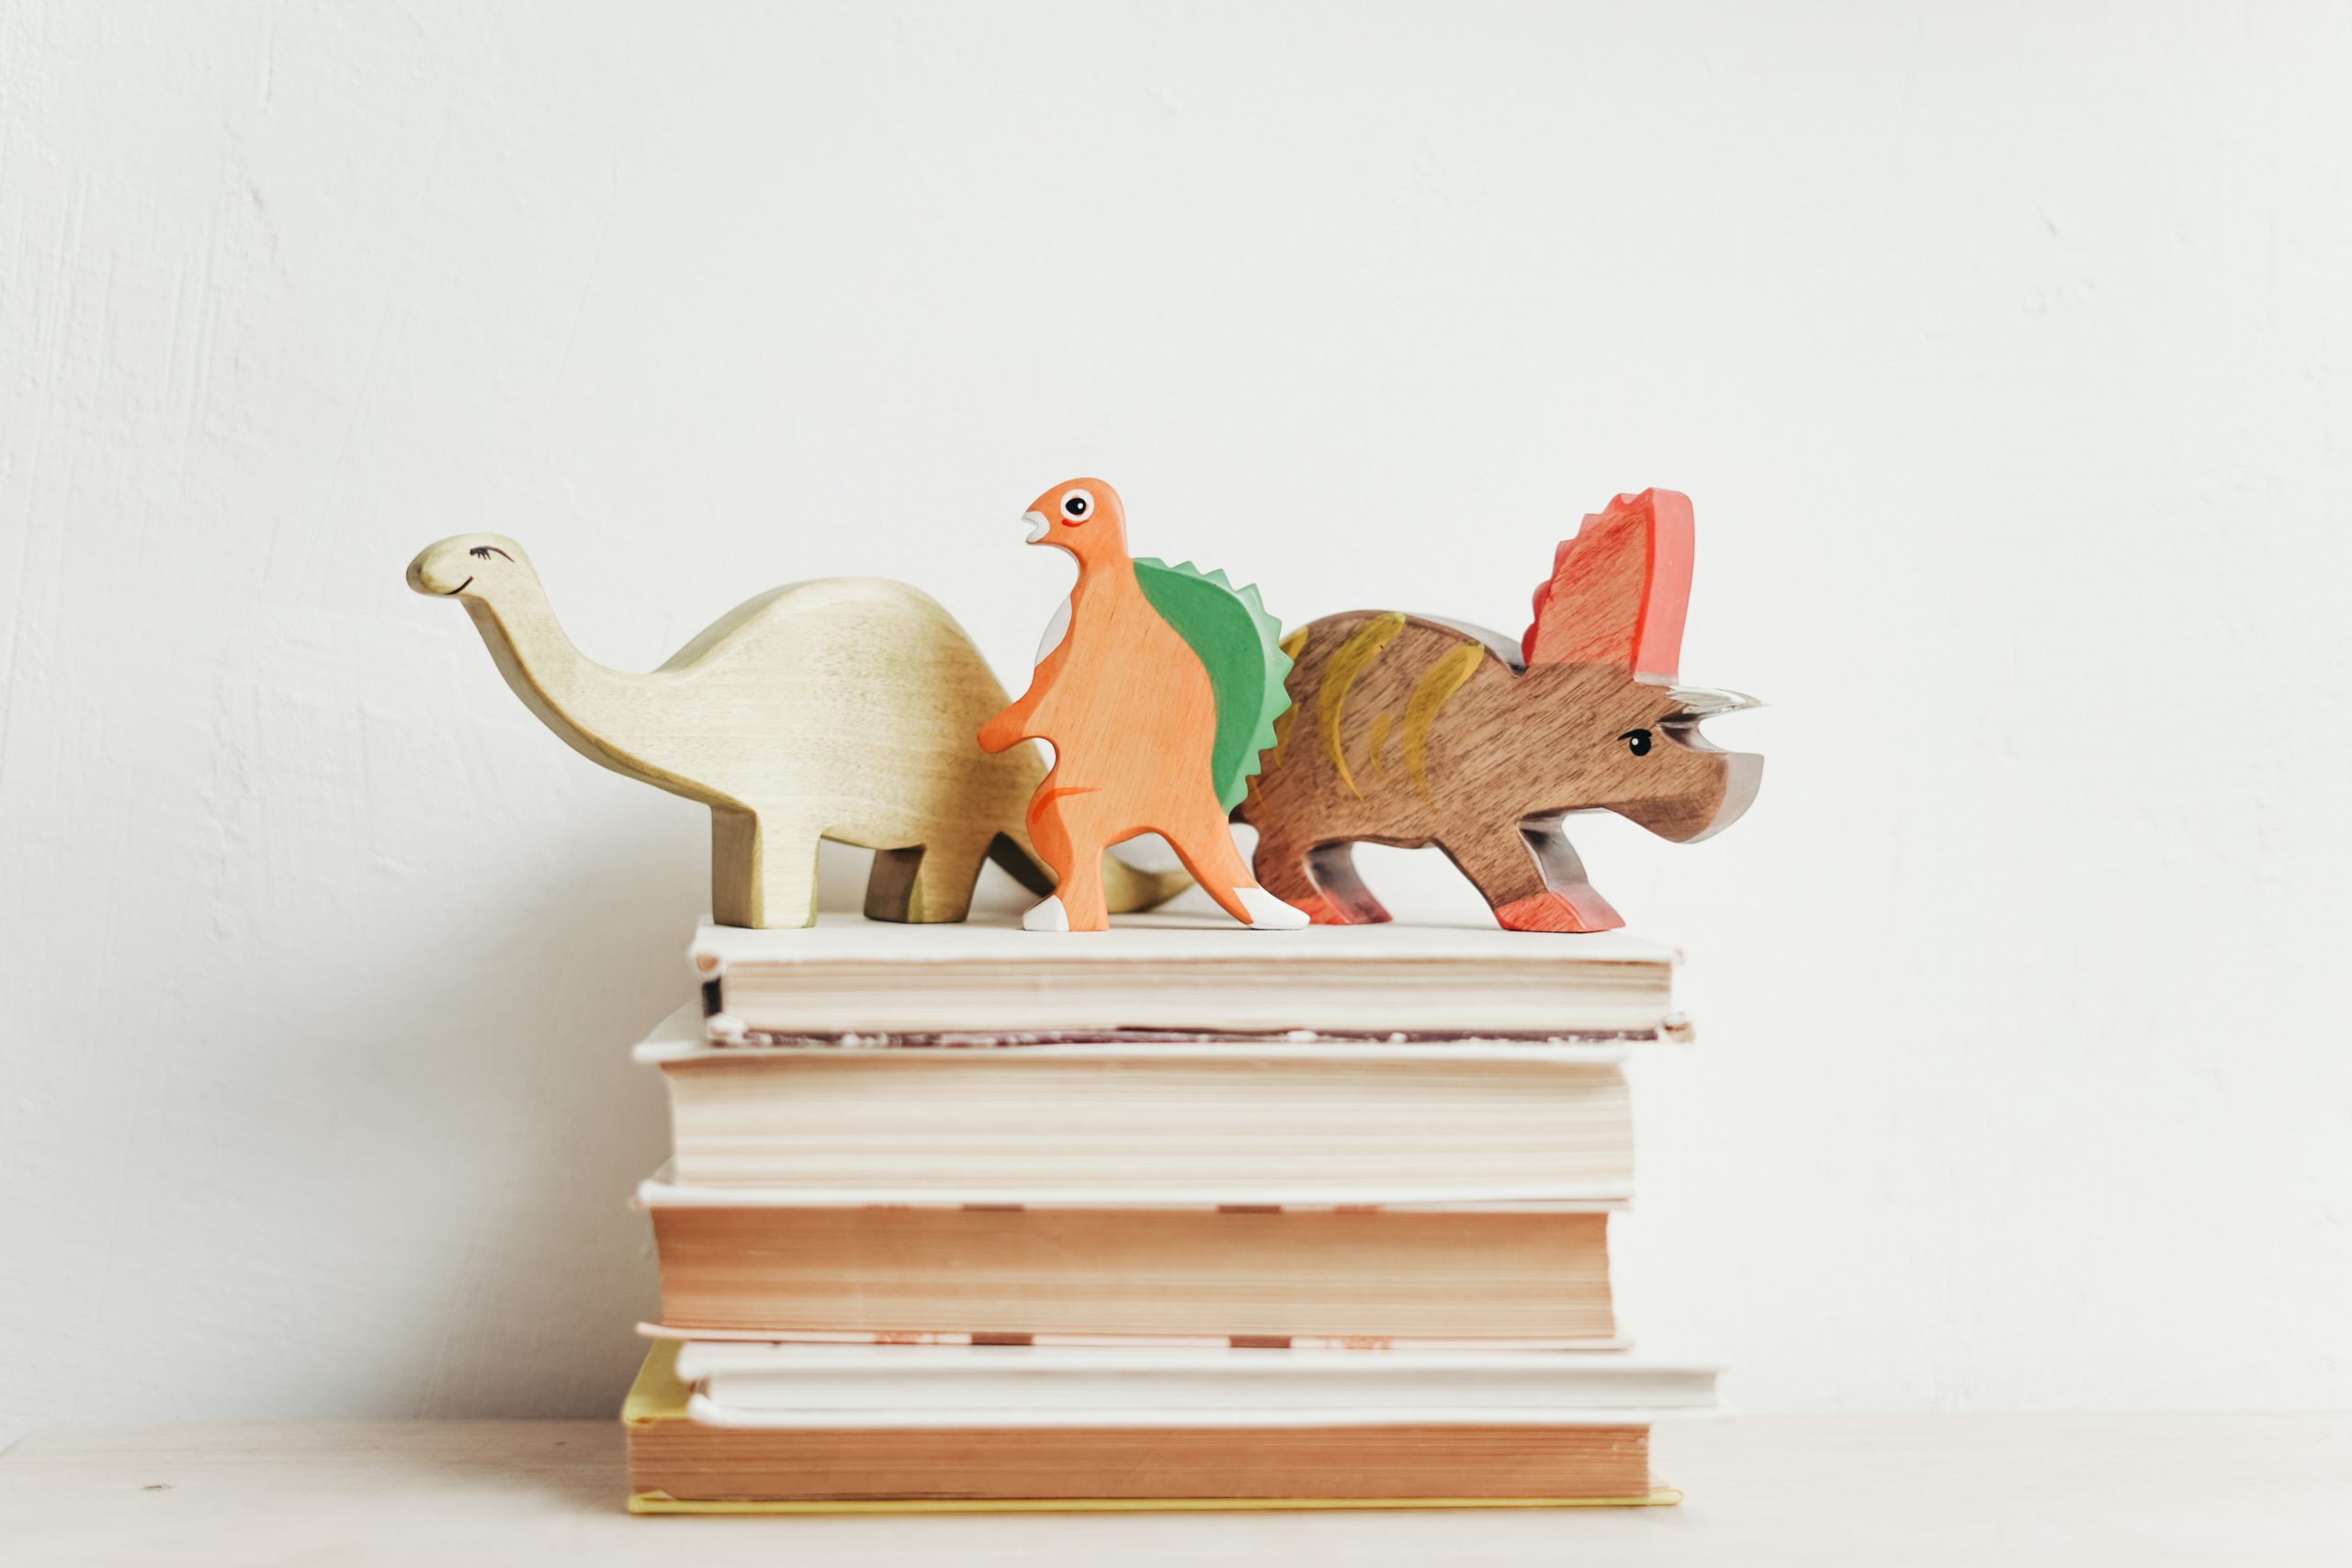 3 wooden dinosaur toys on stack of books